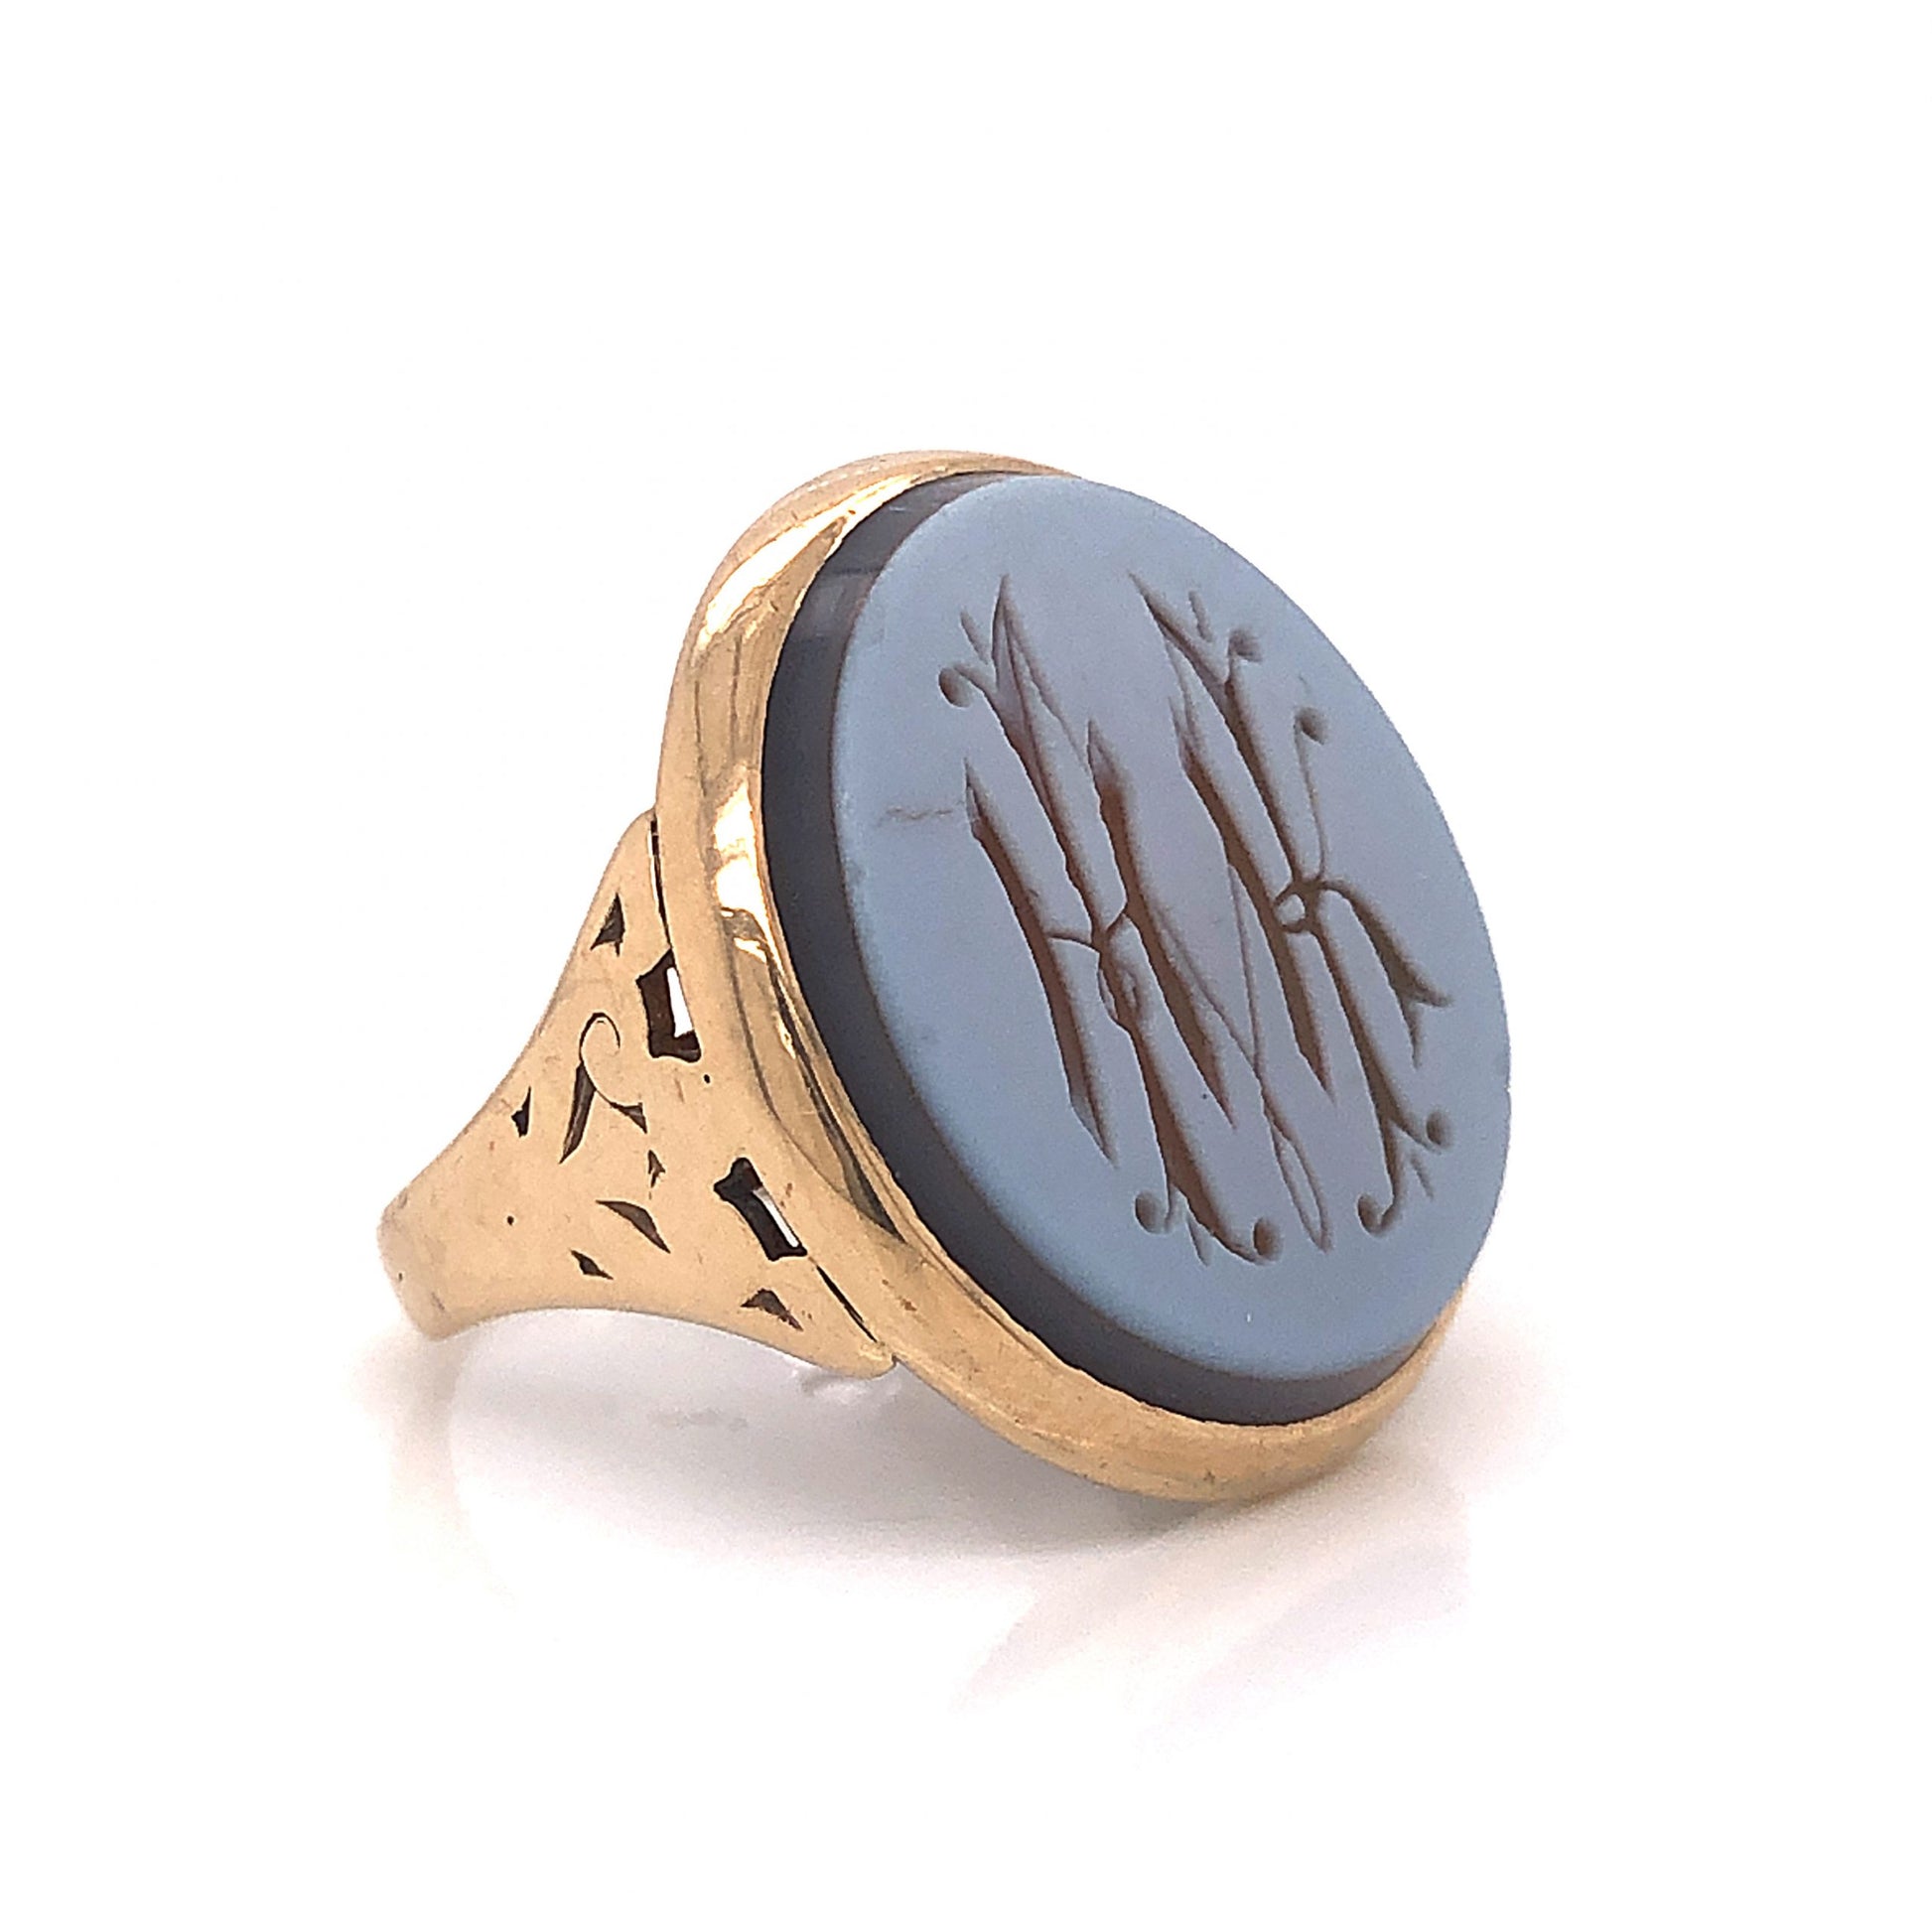 Victorian Engraved Agate Ring in 10k Yellow GoldComposition: 10 Karat Yellow Gold Ring Size: 6.5 Total Gram Weight: 8.4 g